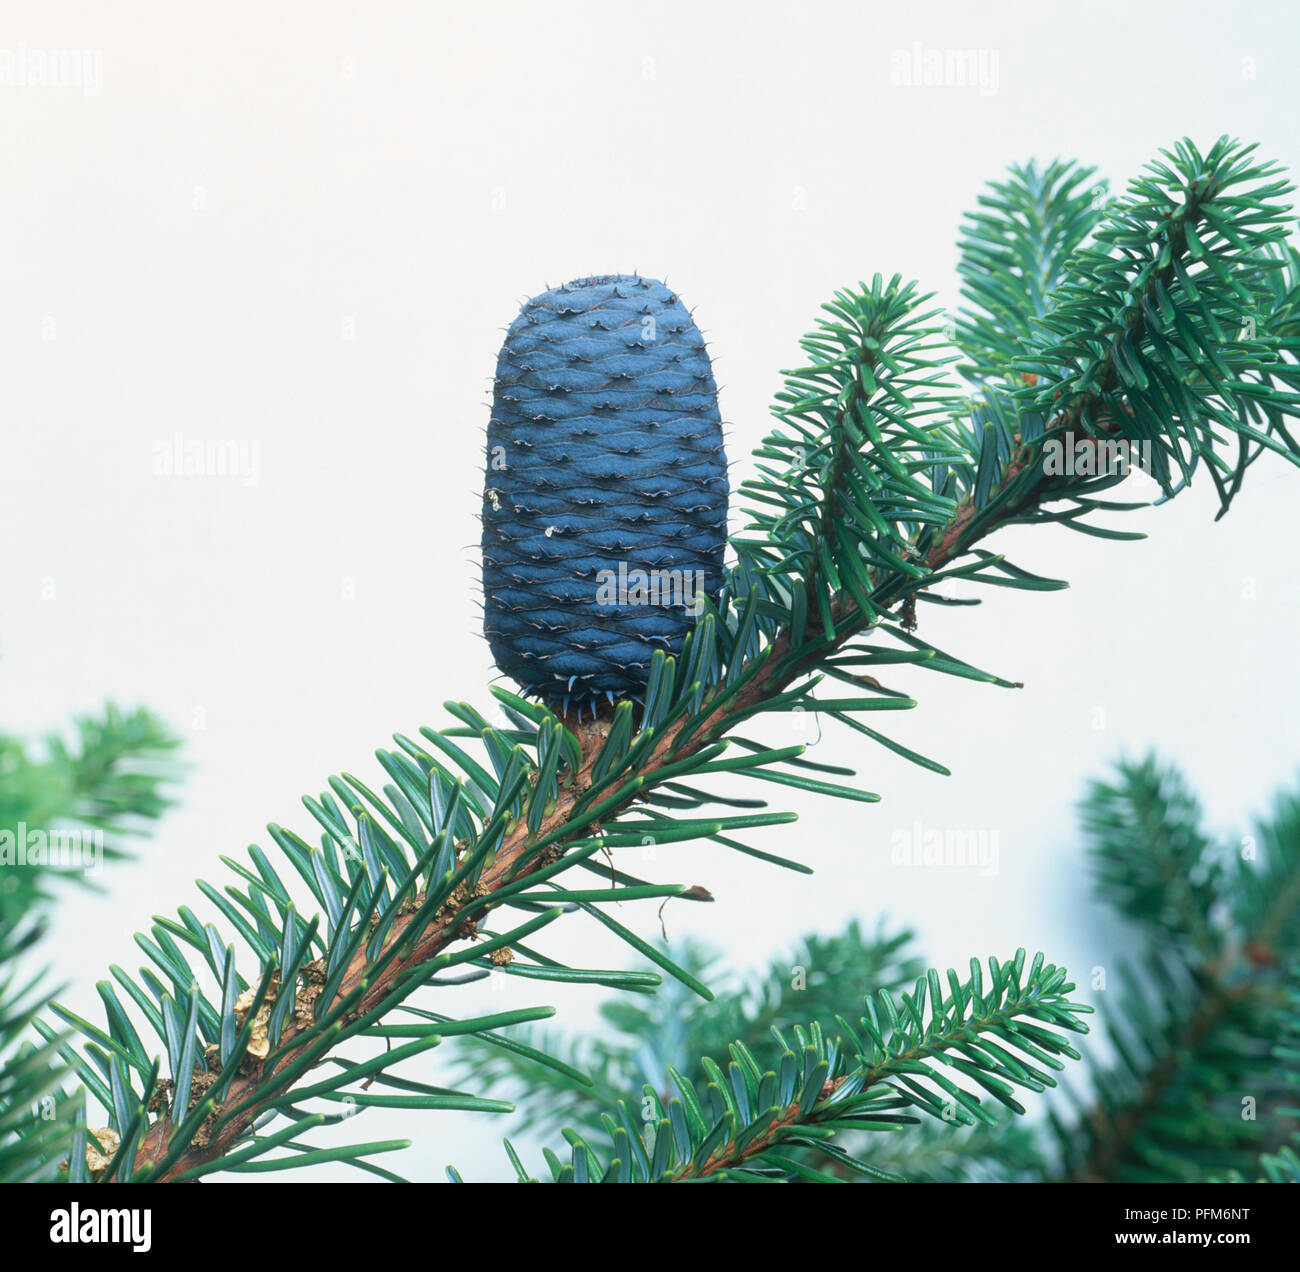 Blue cone on branch of Abies alba (European silver fir), close-up Stock Photo